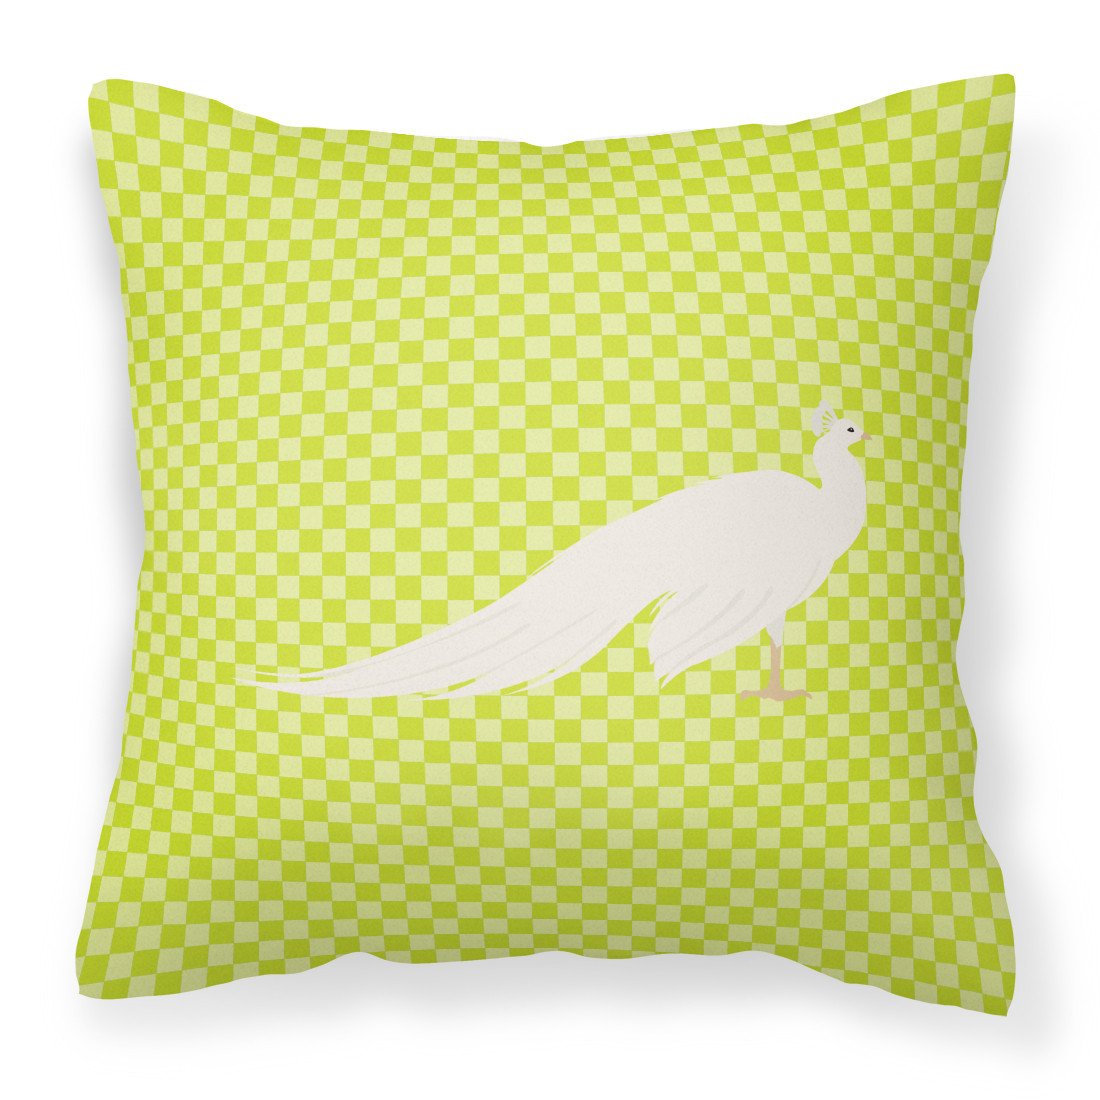 White Peacock Peafowl Green Fabric Decorative Pillow BB7752PW1818 by Caroline's Treasures